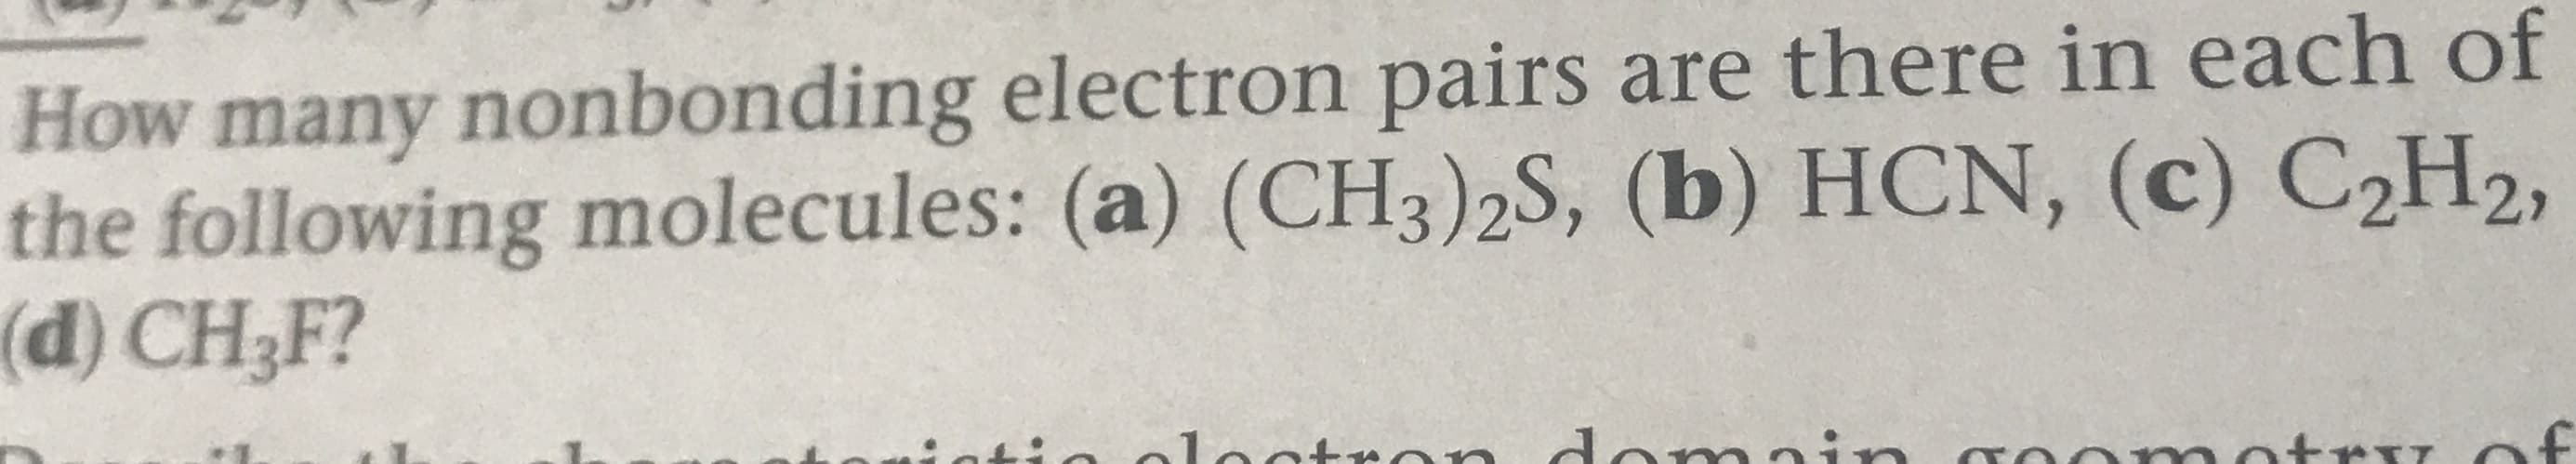 How many nonbonding electron pairs are there in each of
the following molecules: (a) (CH3)2S, (b) HCN, (c) C2H2,
d) CH3F?
deaia
ot
af
motru
